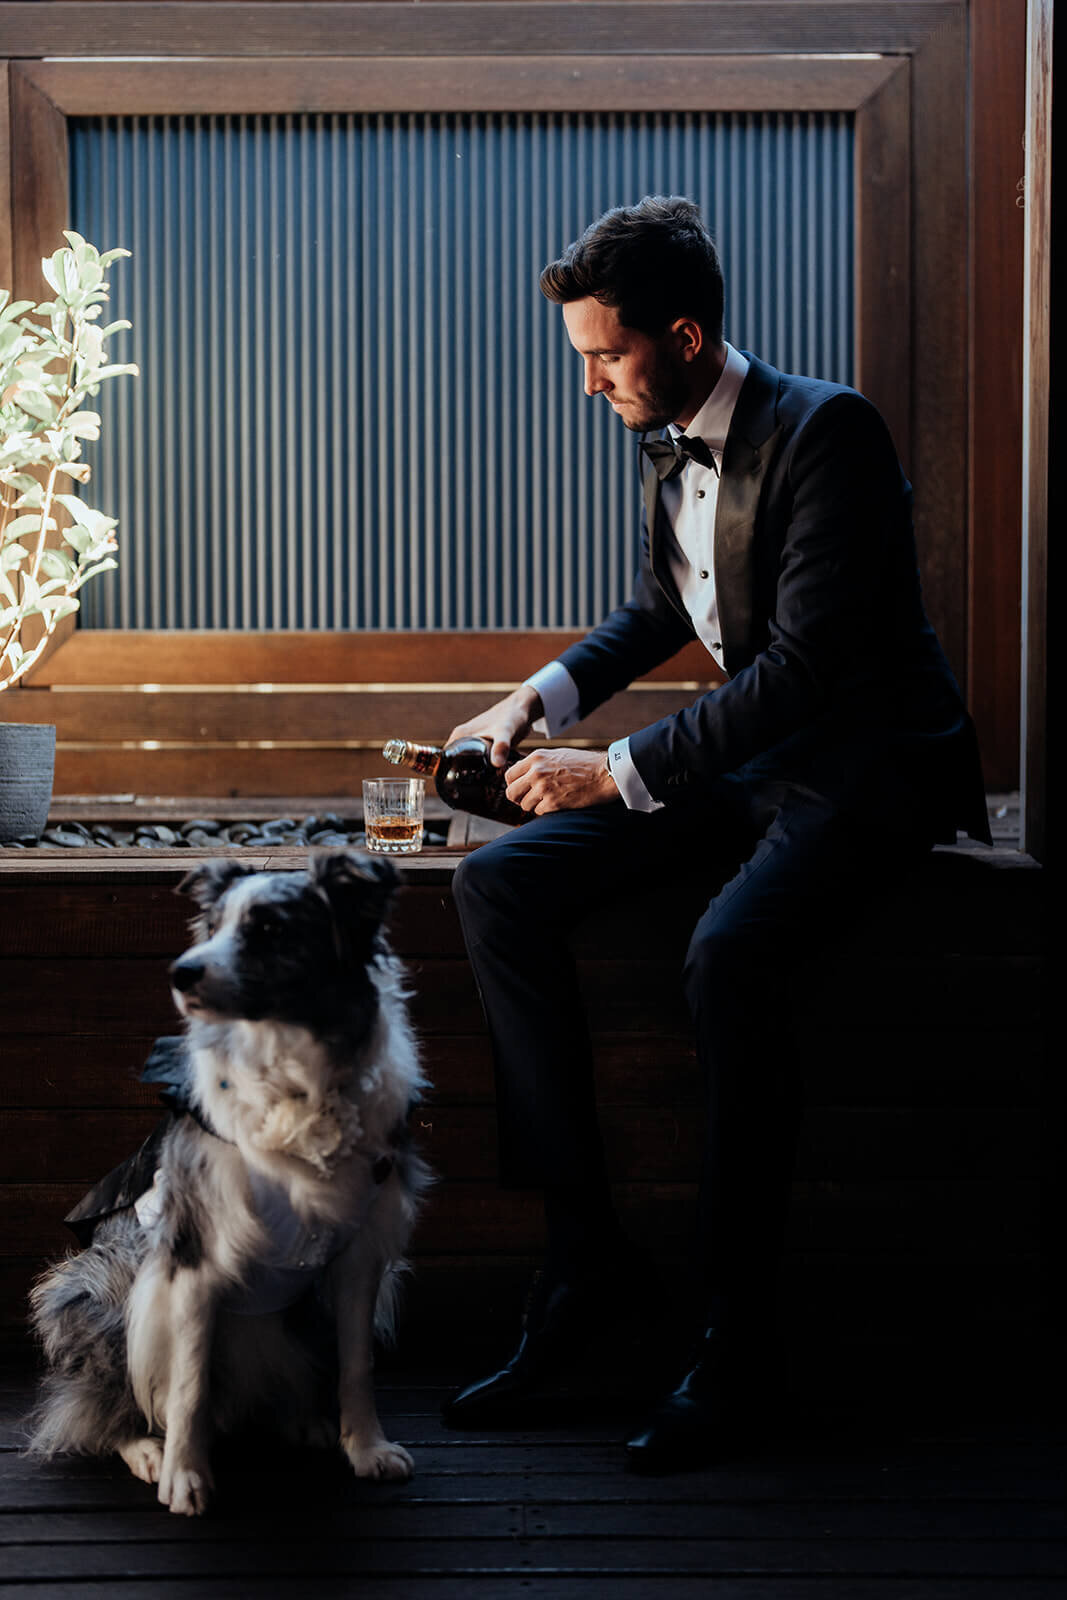 Groom pouring a drink with Dog in forground